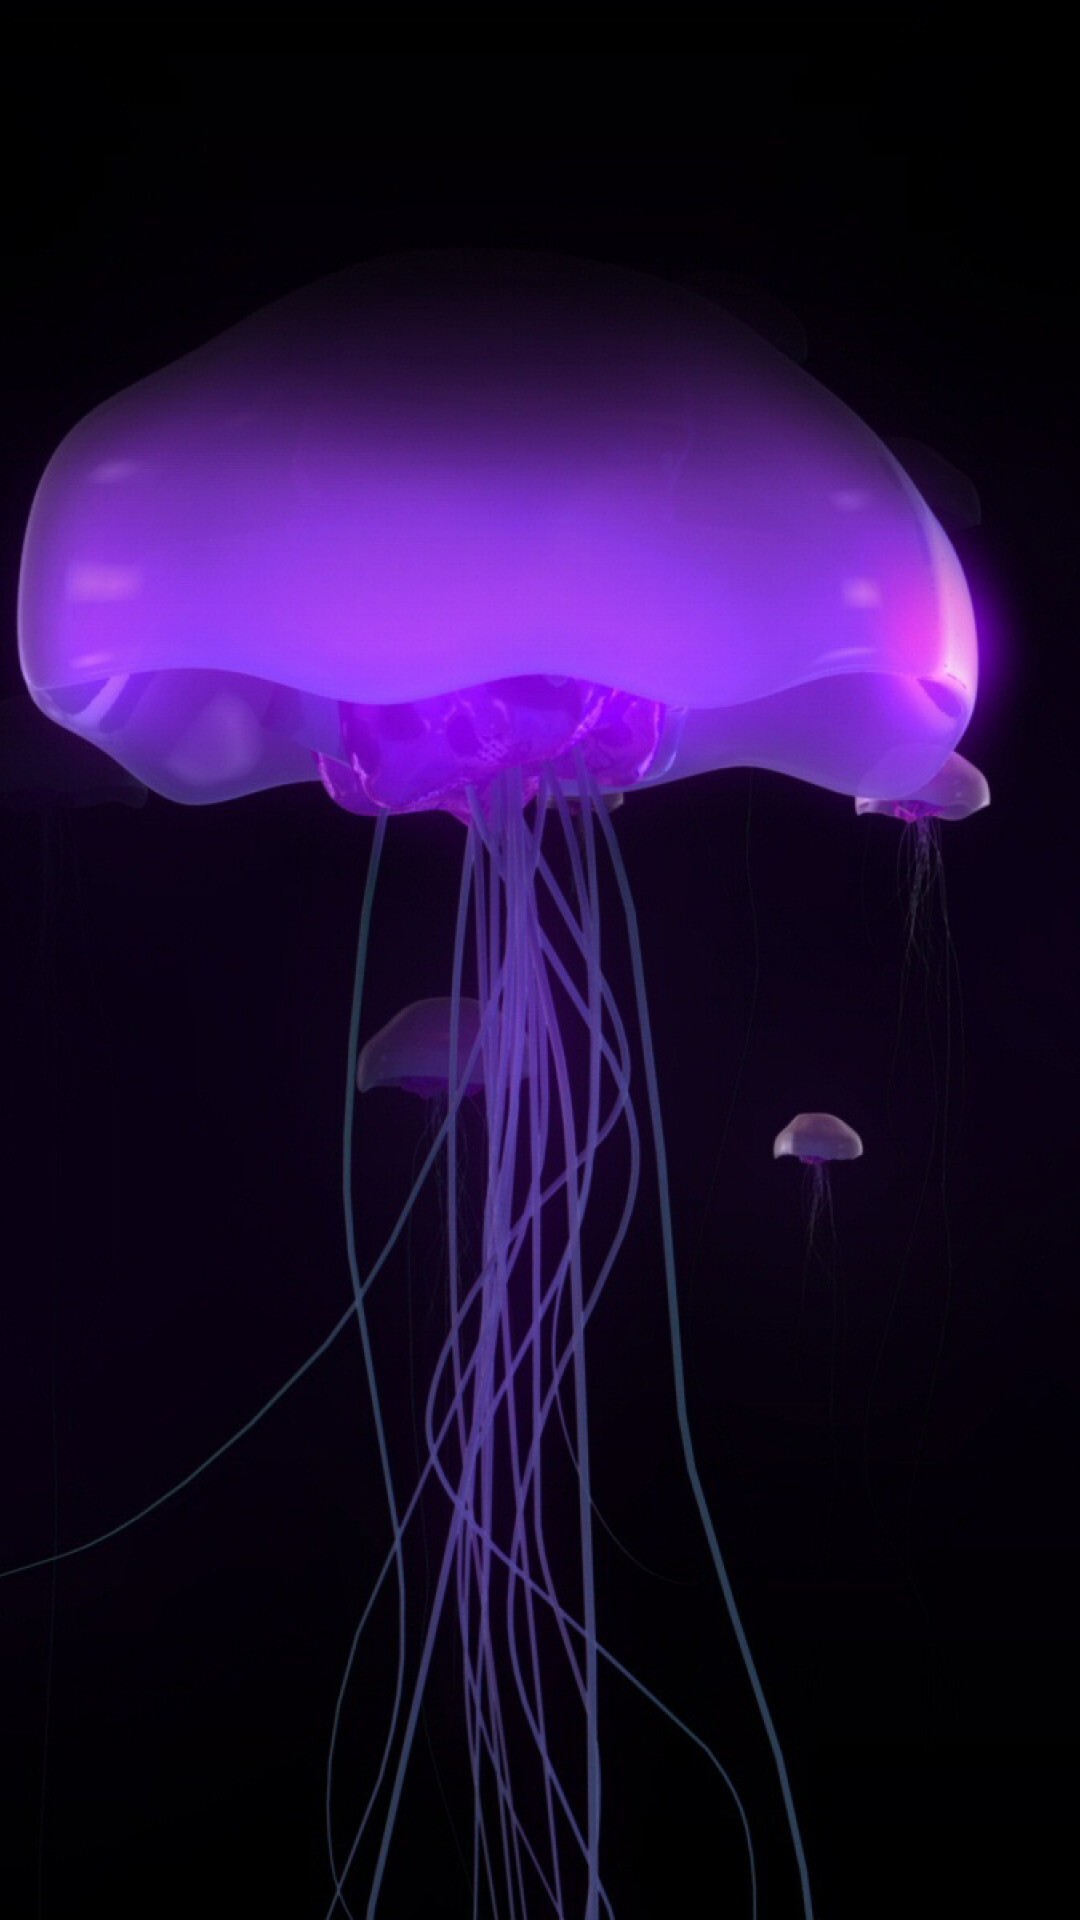 Glowing Jellyfish: Purple alien-looking creature, Translucent, moonlike bell, Trailing tentacles. 1080x1920 Full HD Background.